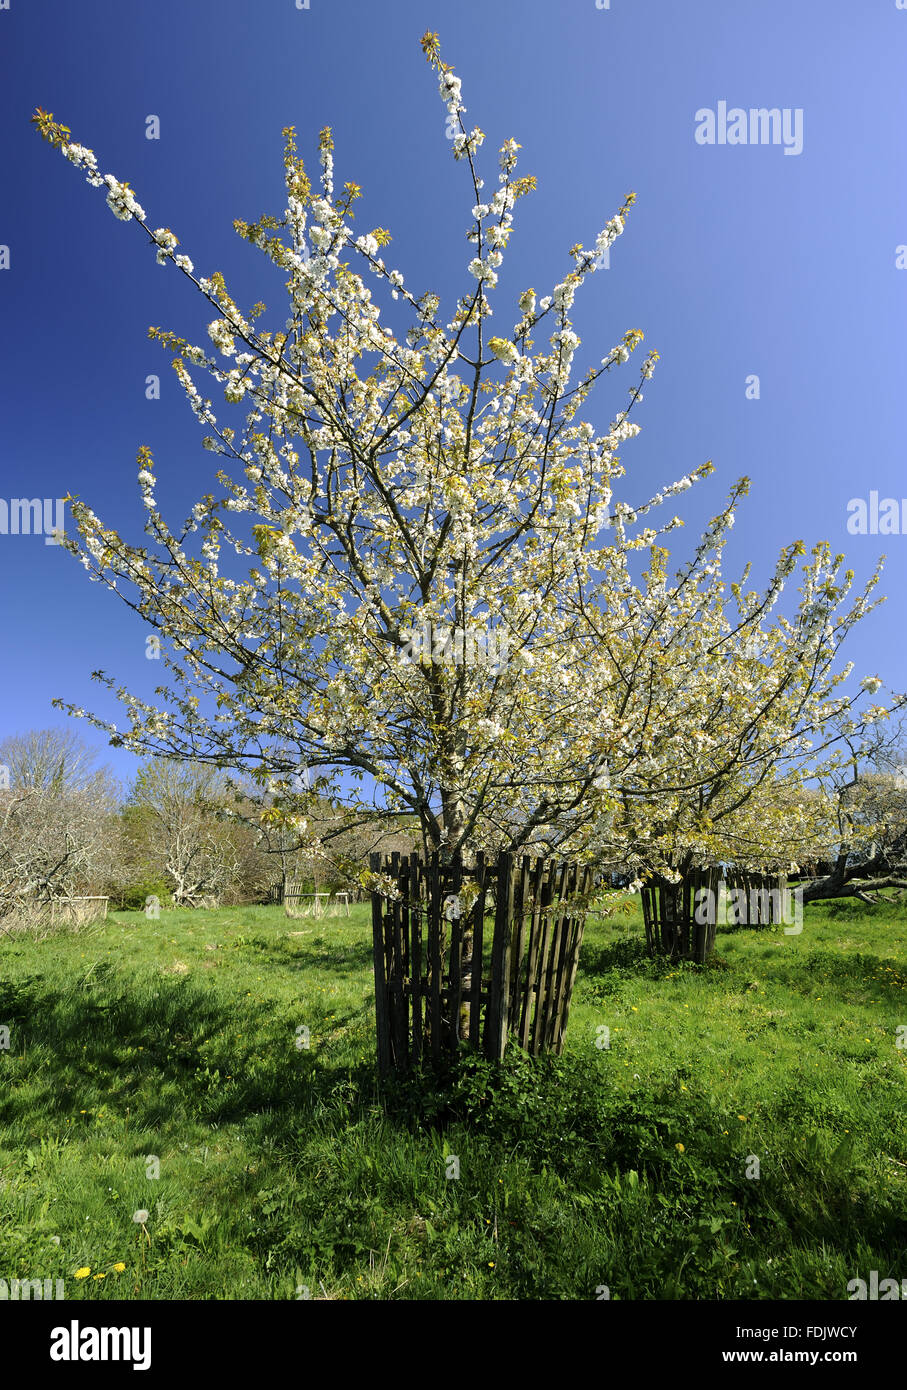 Cherry trees in  blossom in April in Bohetherick orchard, near Cotehele Quay, Cornwall. Bohetherick is one of the few remaining cherry orchards in the Tamar Valley. Stock Photo